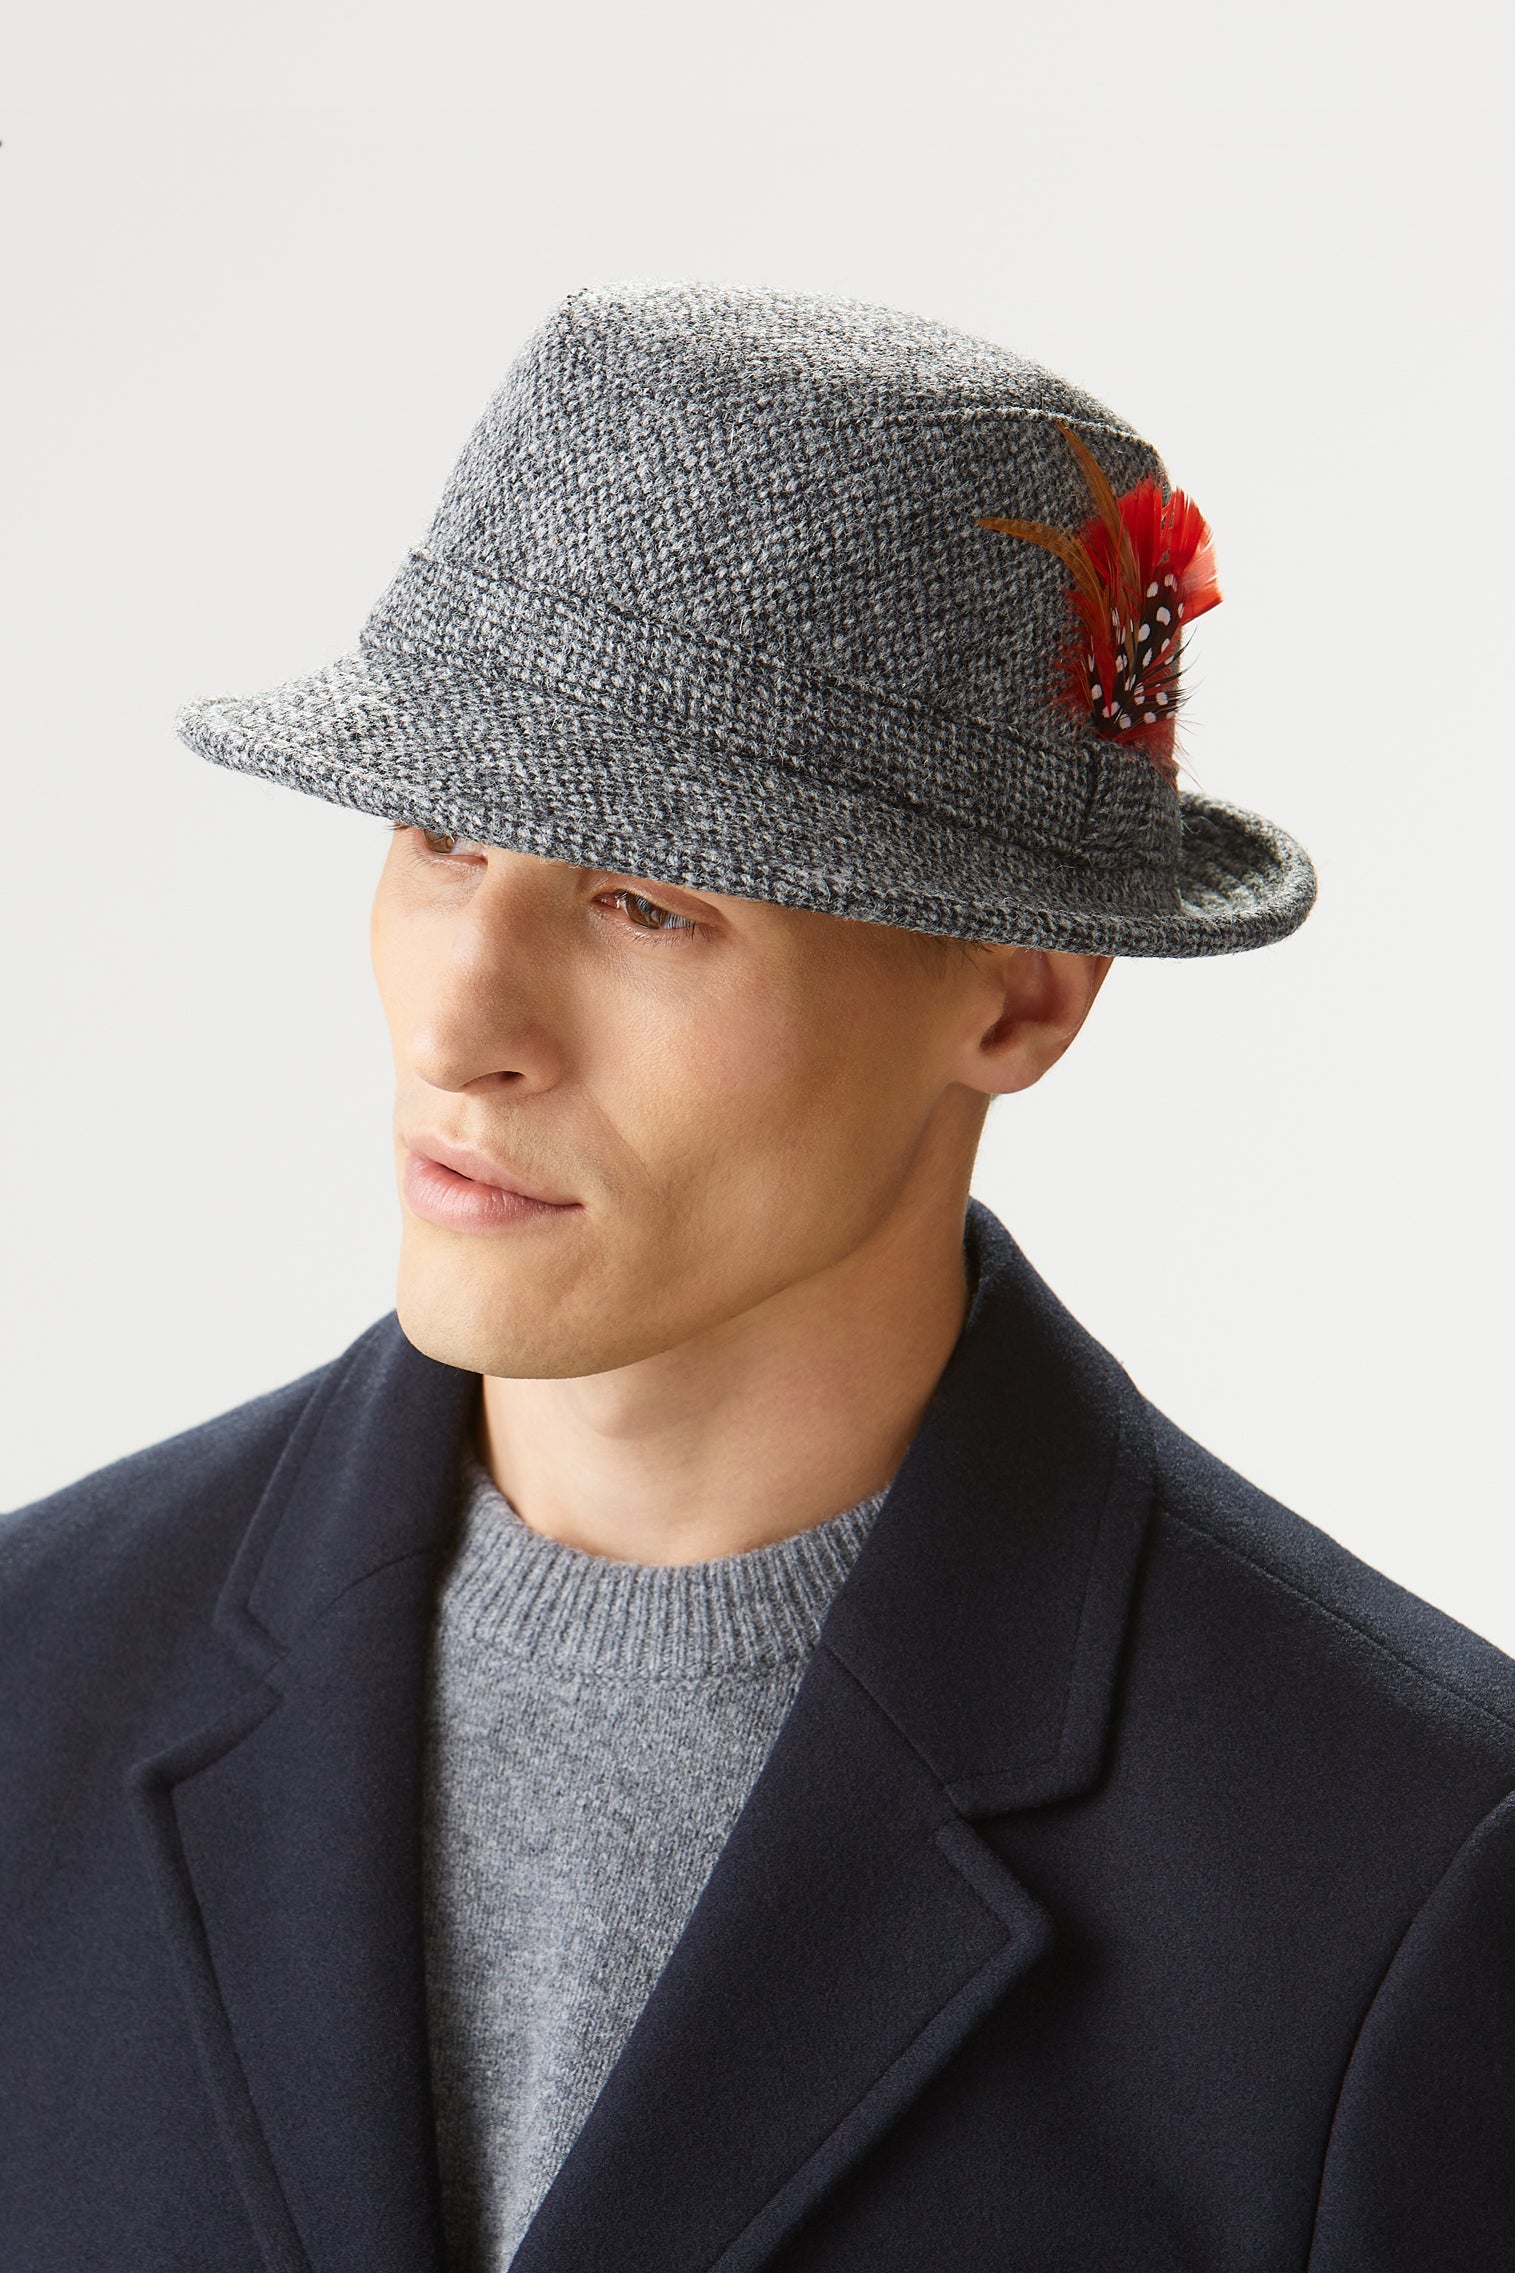 Grouse Tweed Rollable Hat - Men's Packable & Rollable Hats - Lock & Co. Hatters London UK